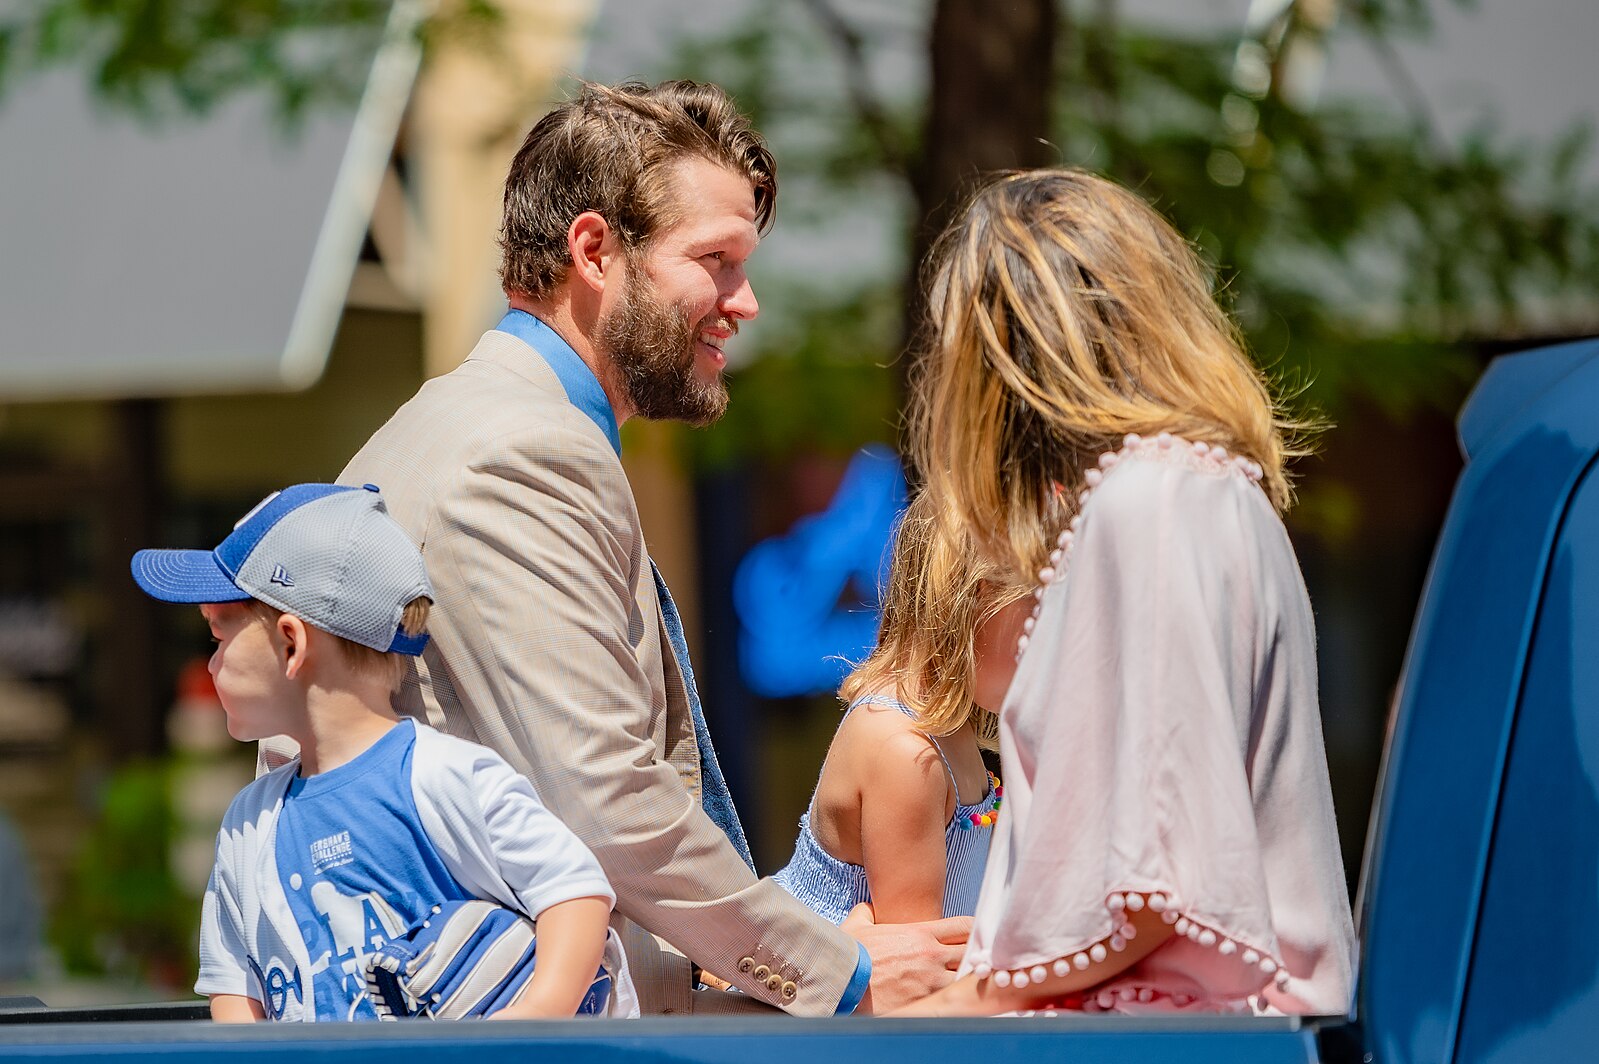 Inside Kershaw's 17th season with the Dodgers